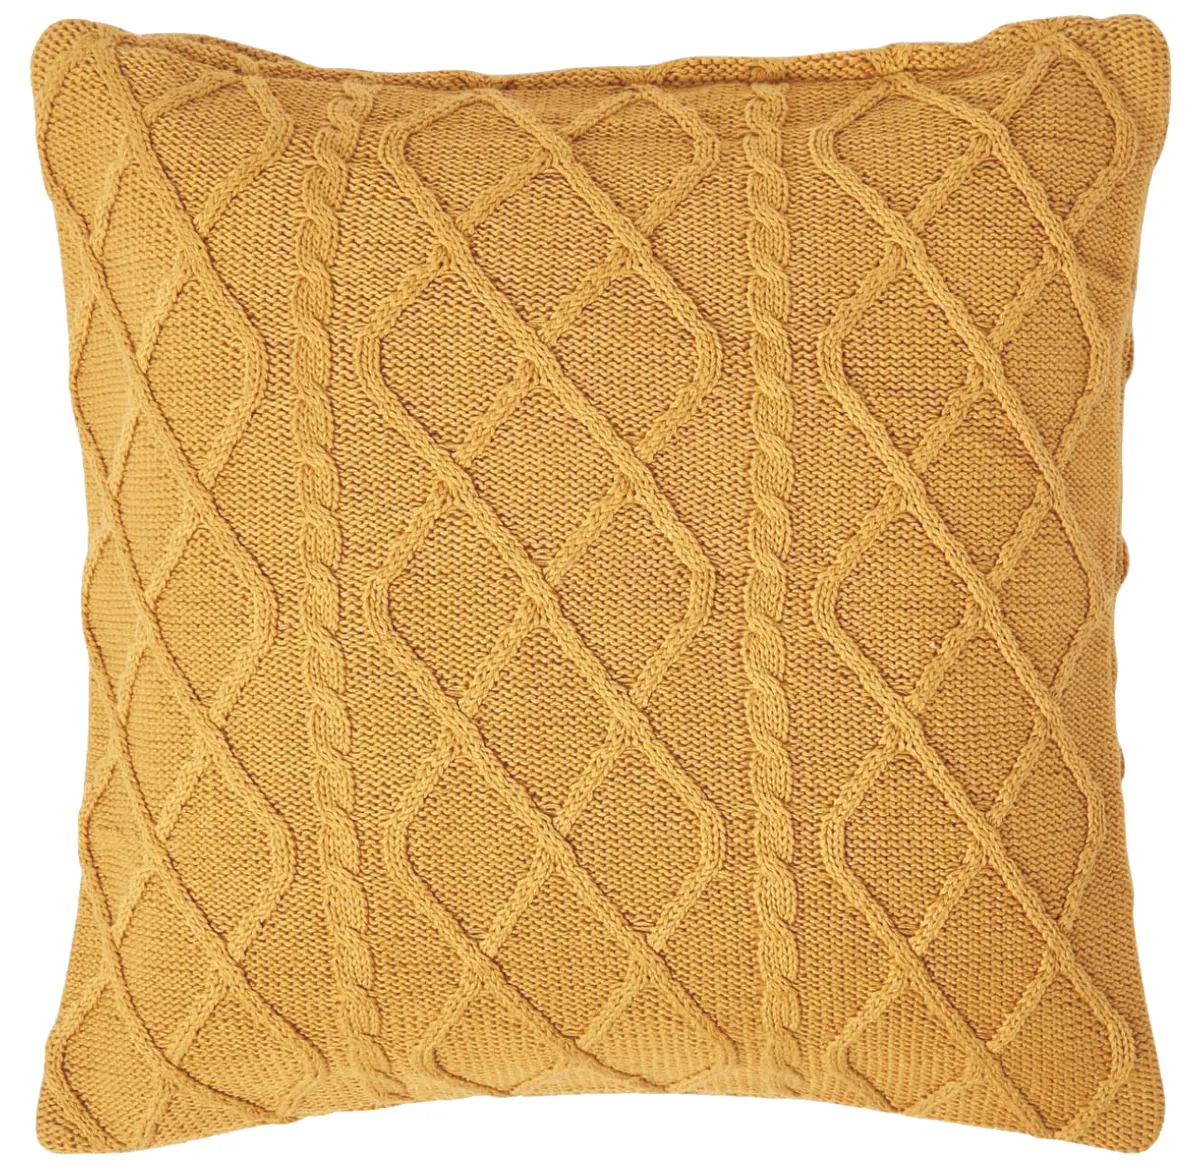 Mustard diamond cable knit cushion cover, £12.99, Homescapes